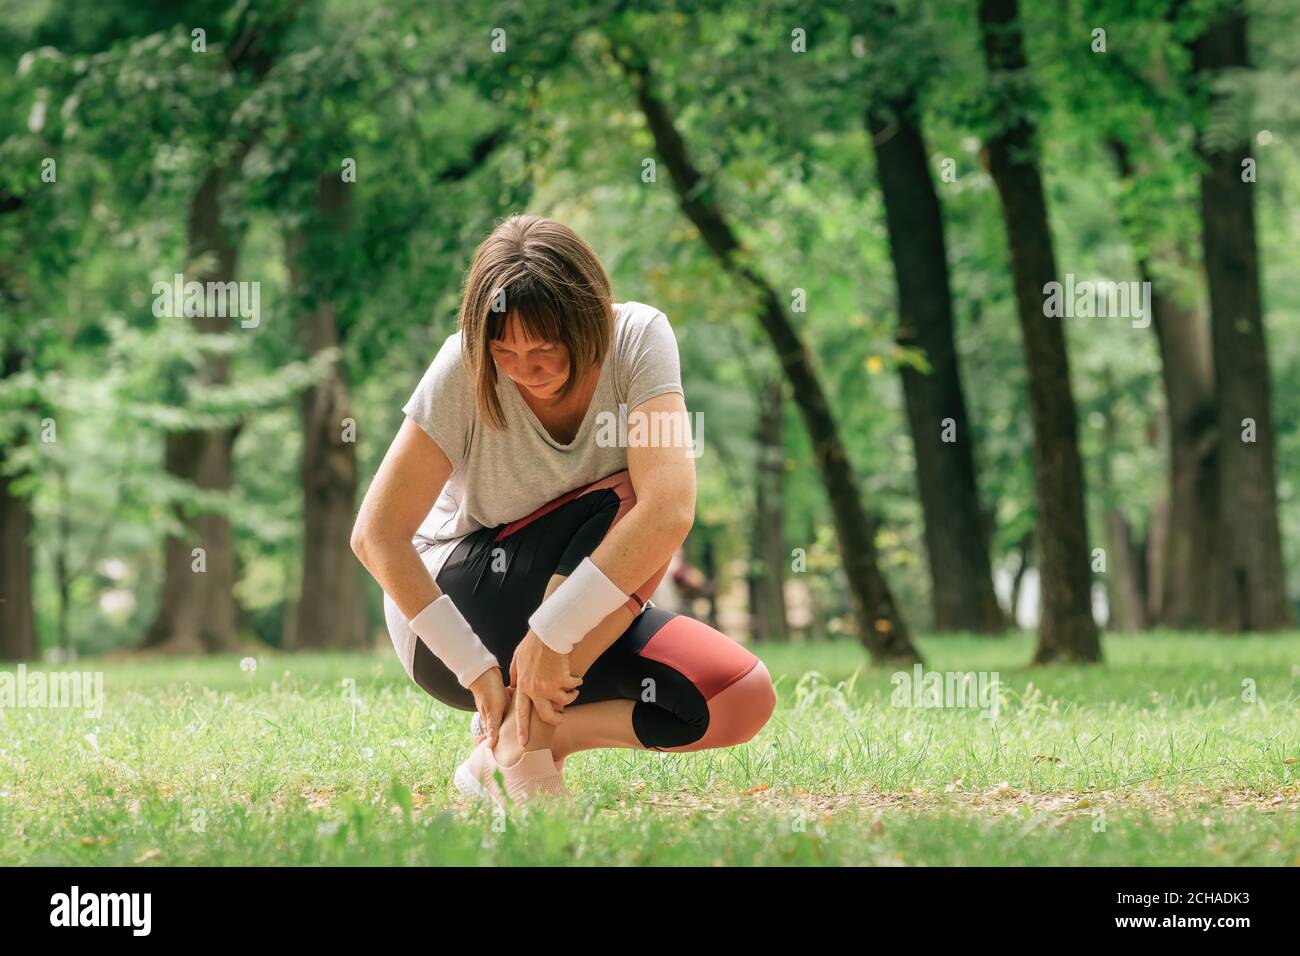 Female jogger with painful ankle injury during park jogging activity, selective focus Stock Photo